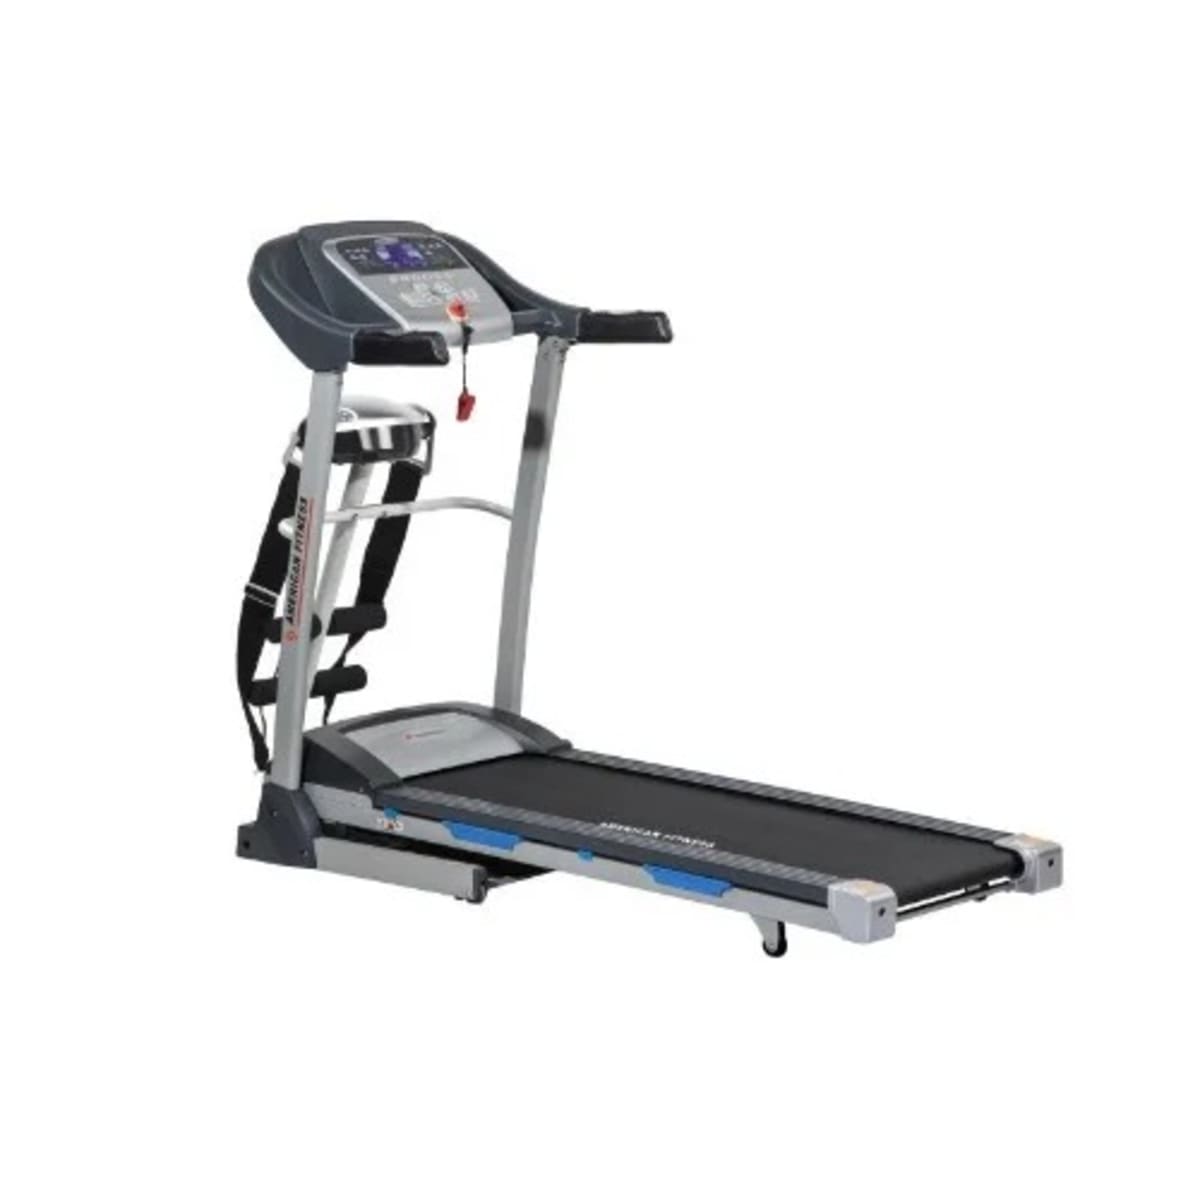 Treadmill Fitness With Massager - Incline & Dumbbell - 2.5hp